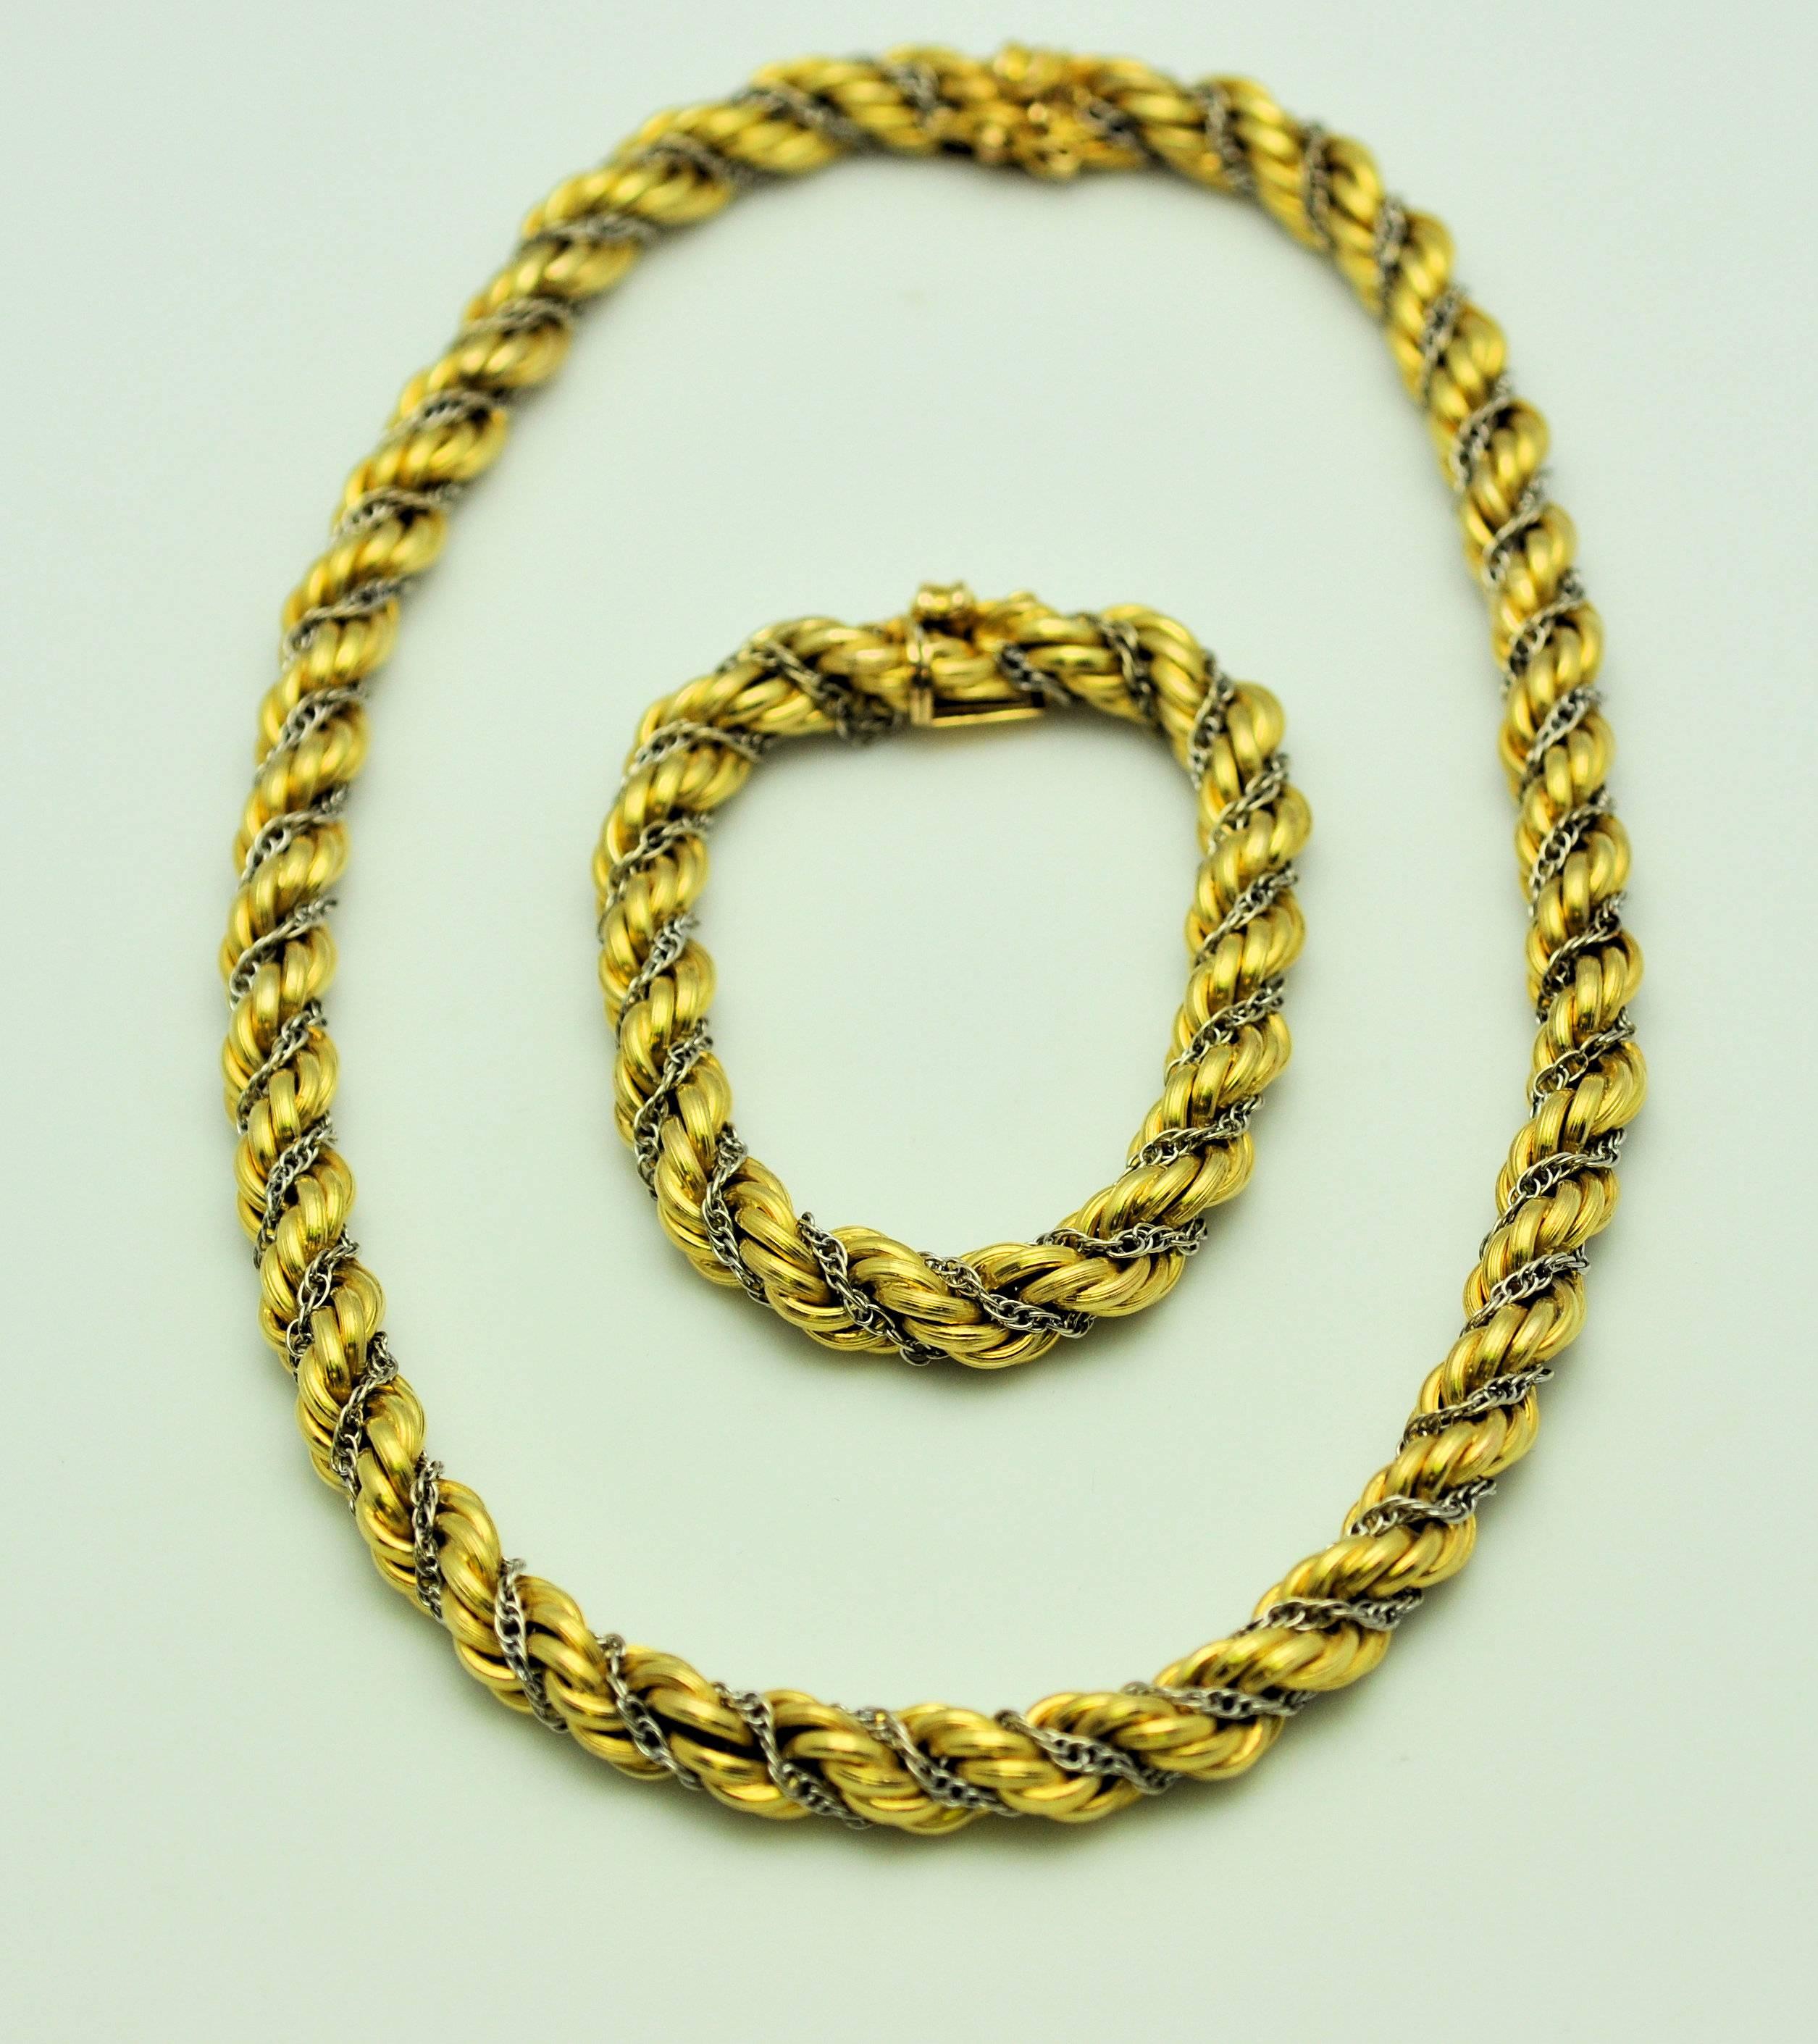 14K yellow textured yellow gold with white gold chain detail.  The white gold chain rests inside groove of the rope chain.  The two combine to create another necklace measuring 24 inches.  This piece was a wardrobe staple in the 1950's.  The